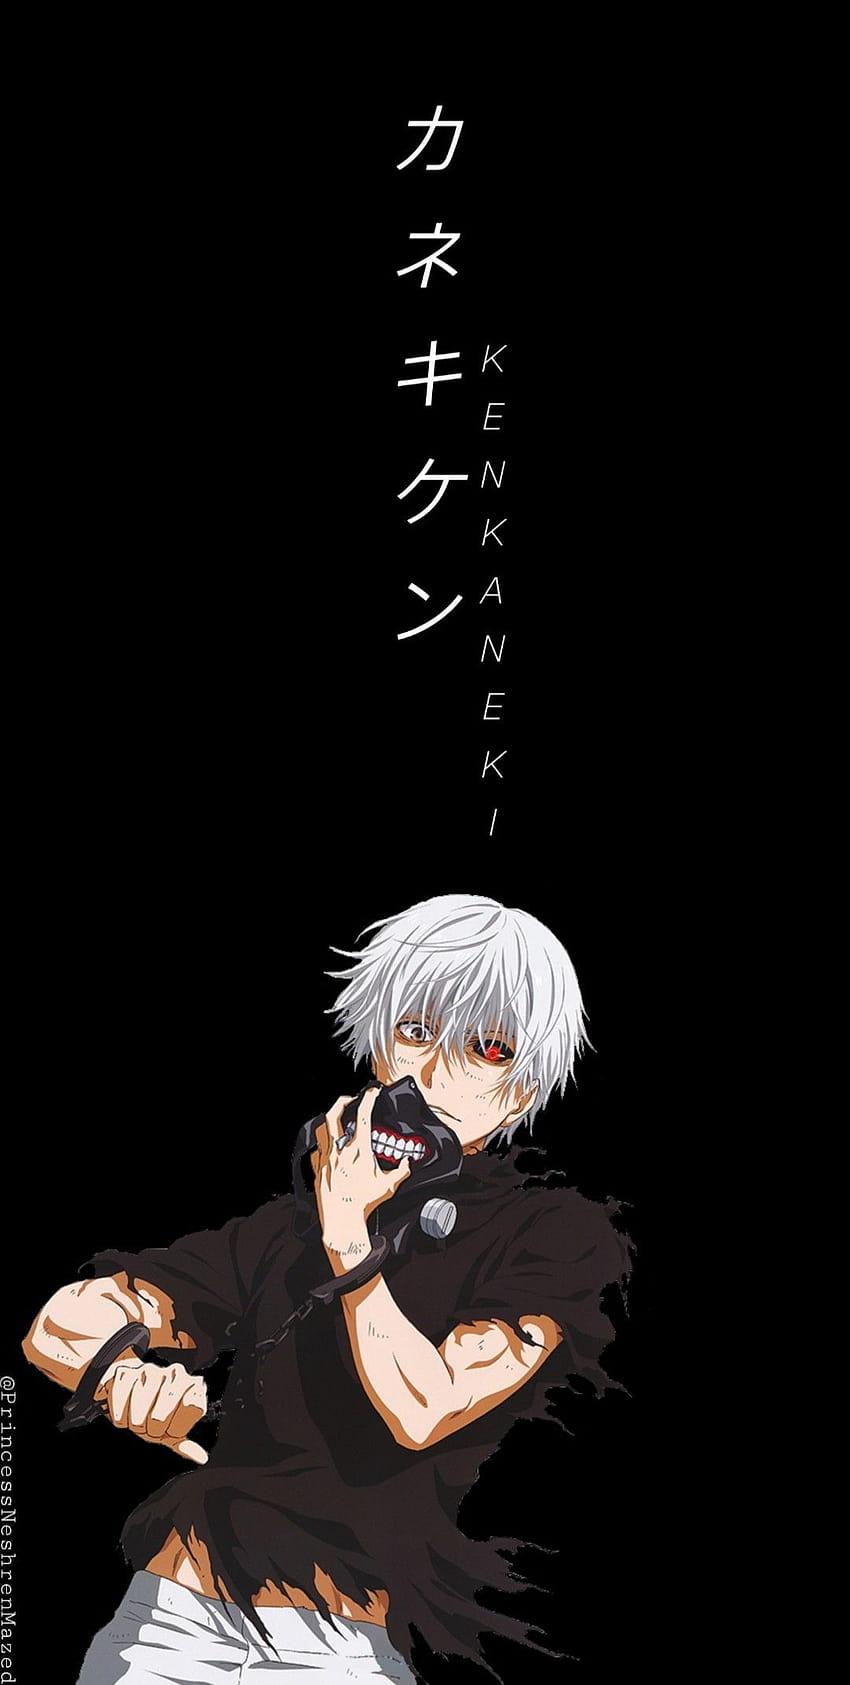 Pin on, aesthetic tokyo ghoul playstation HD phone wallpaper